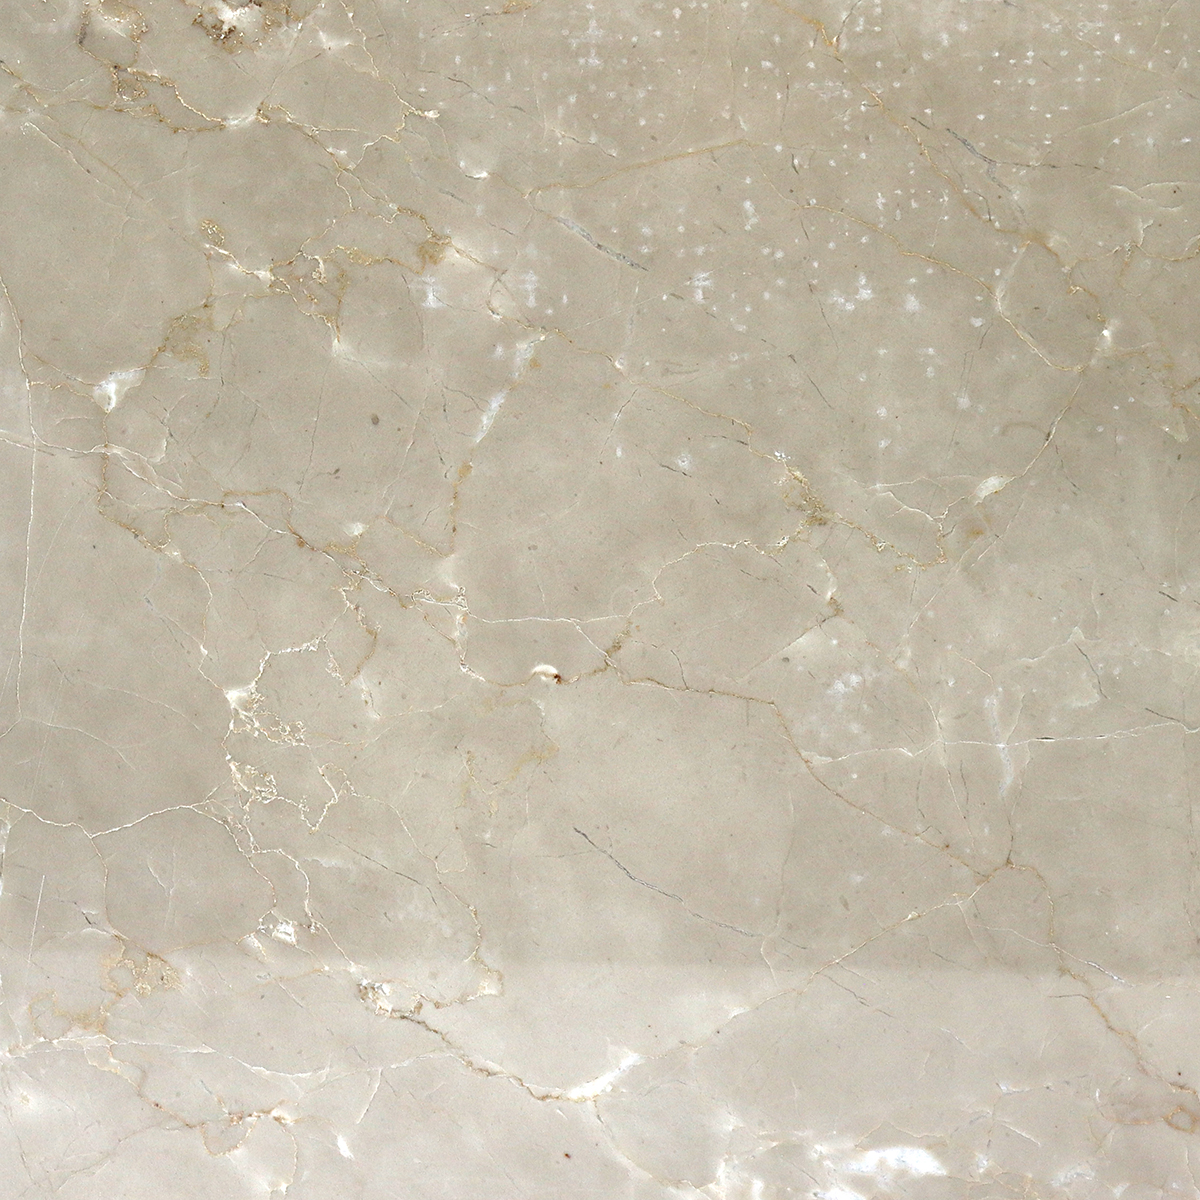 static/products/marbleSlabs/products/MBR21.jpg 